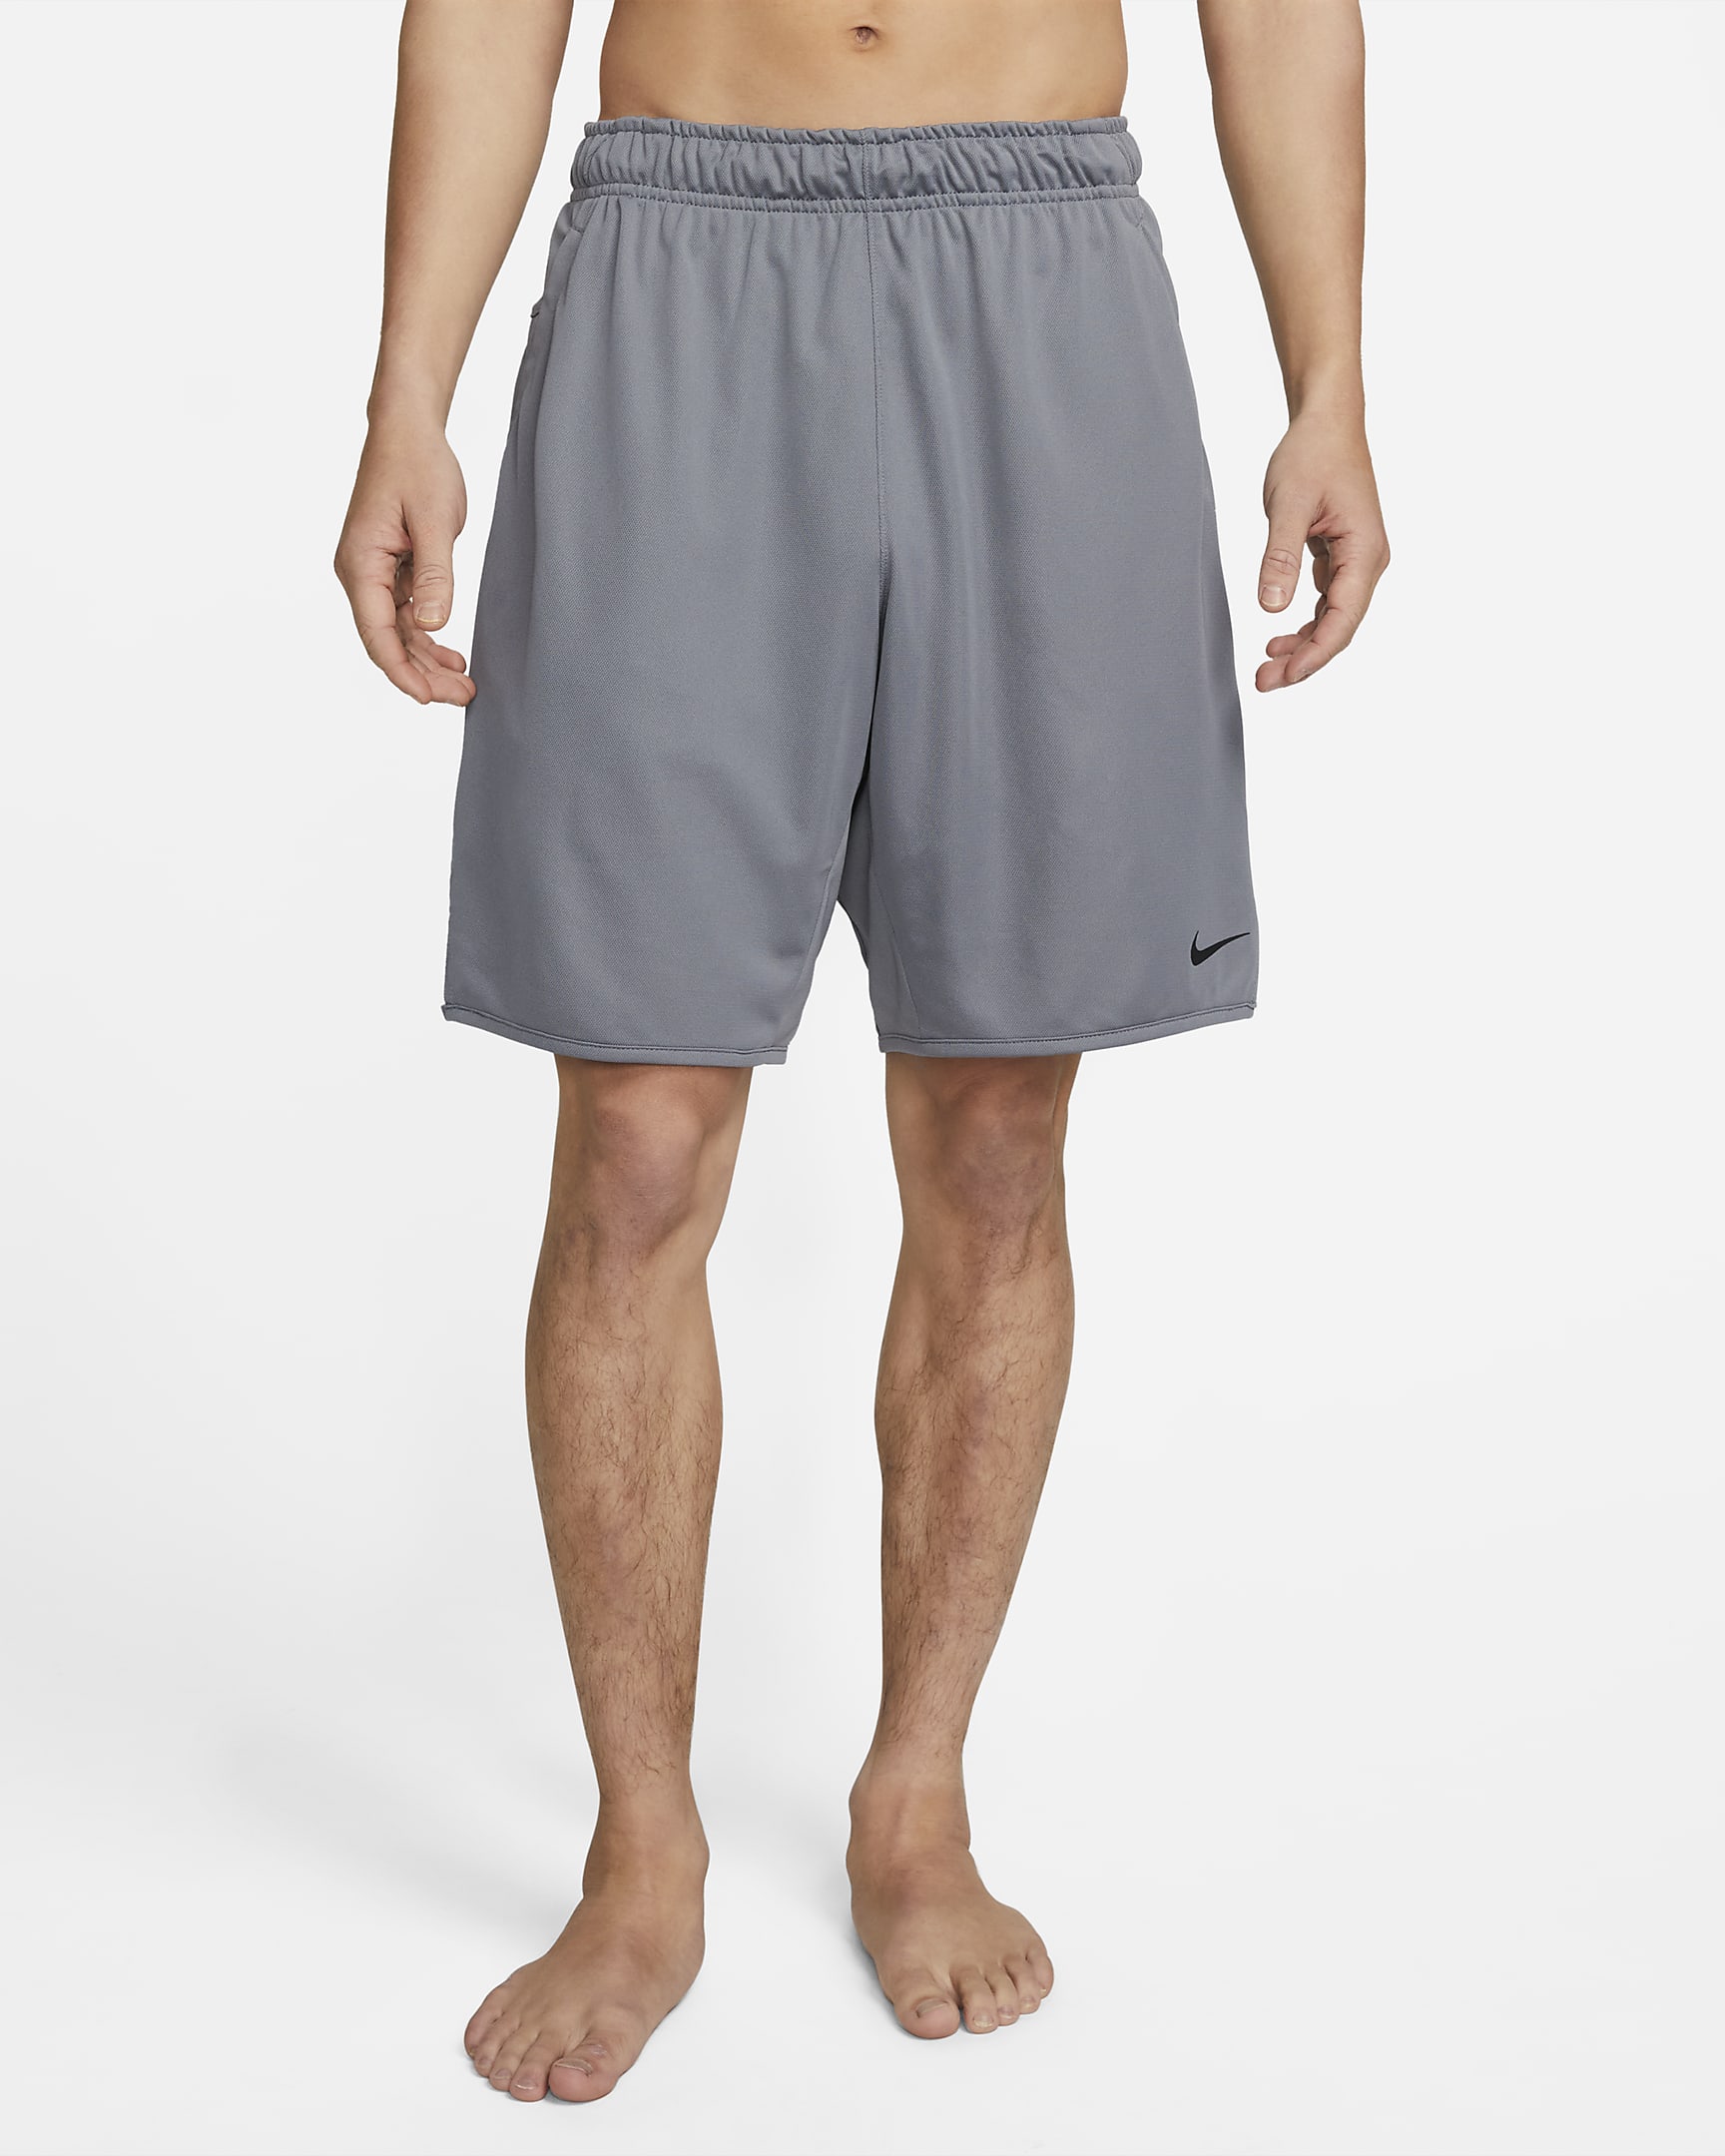 Nike Dri-FIT Totality Men's 23cm (approx.) Unlined Shorts. Nike SG